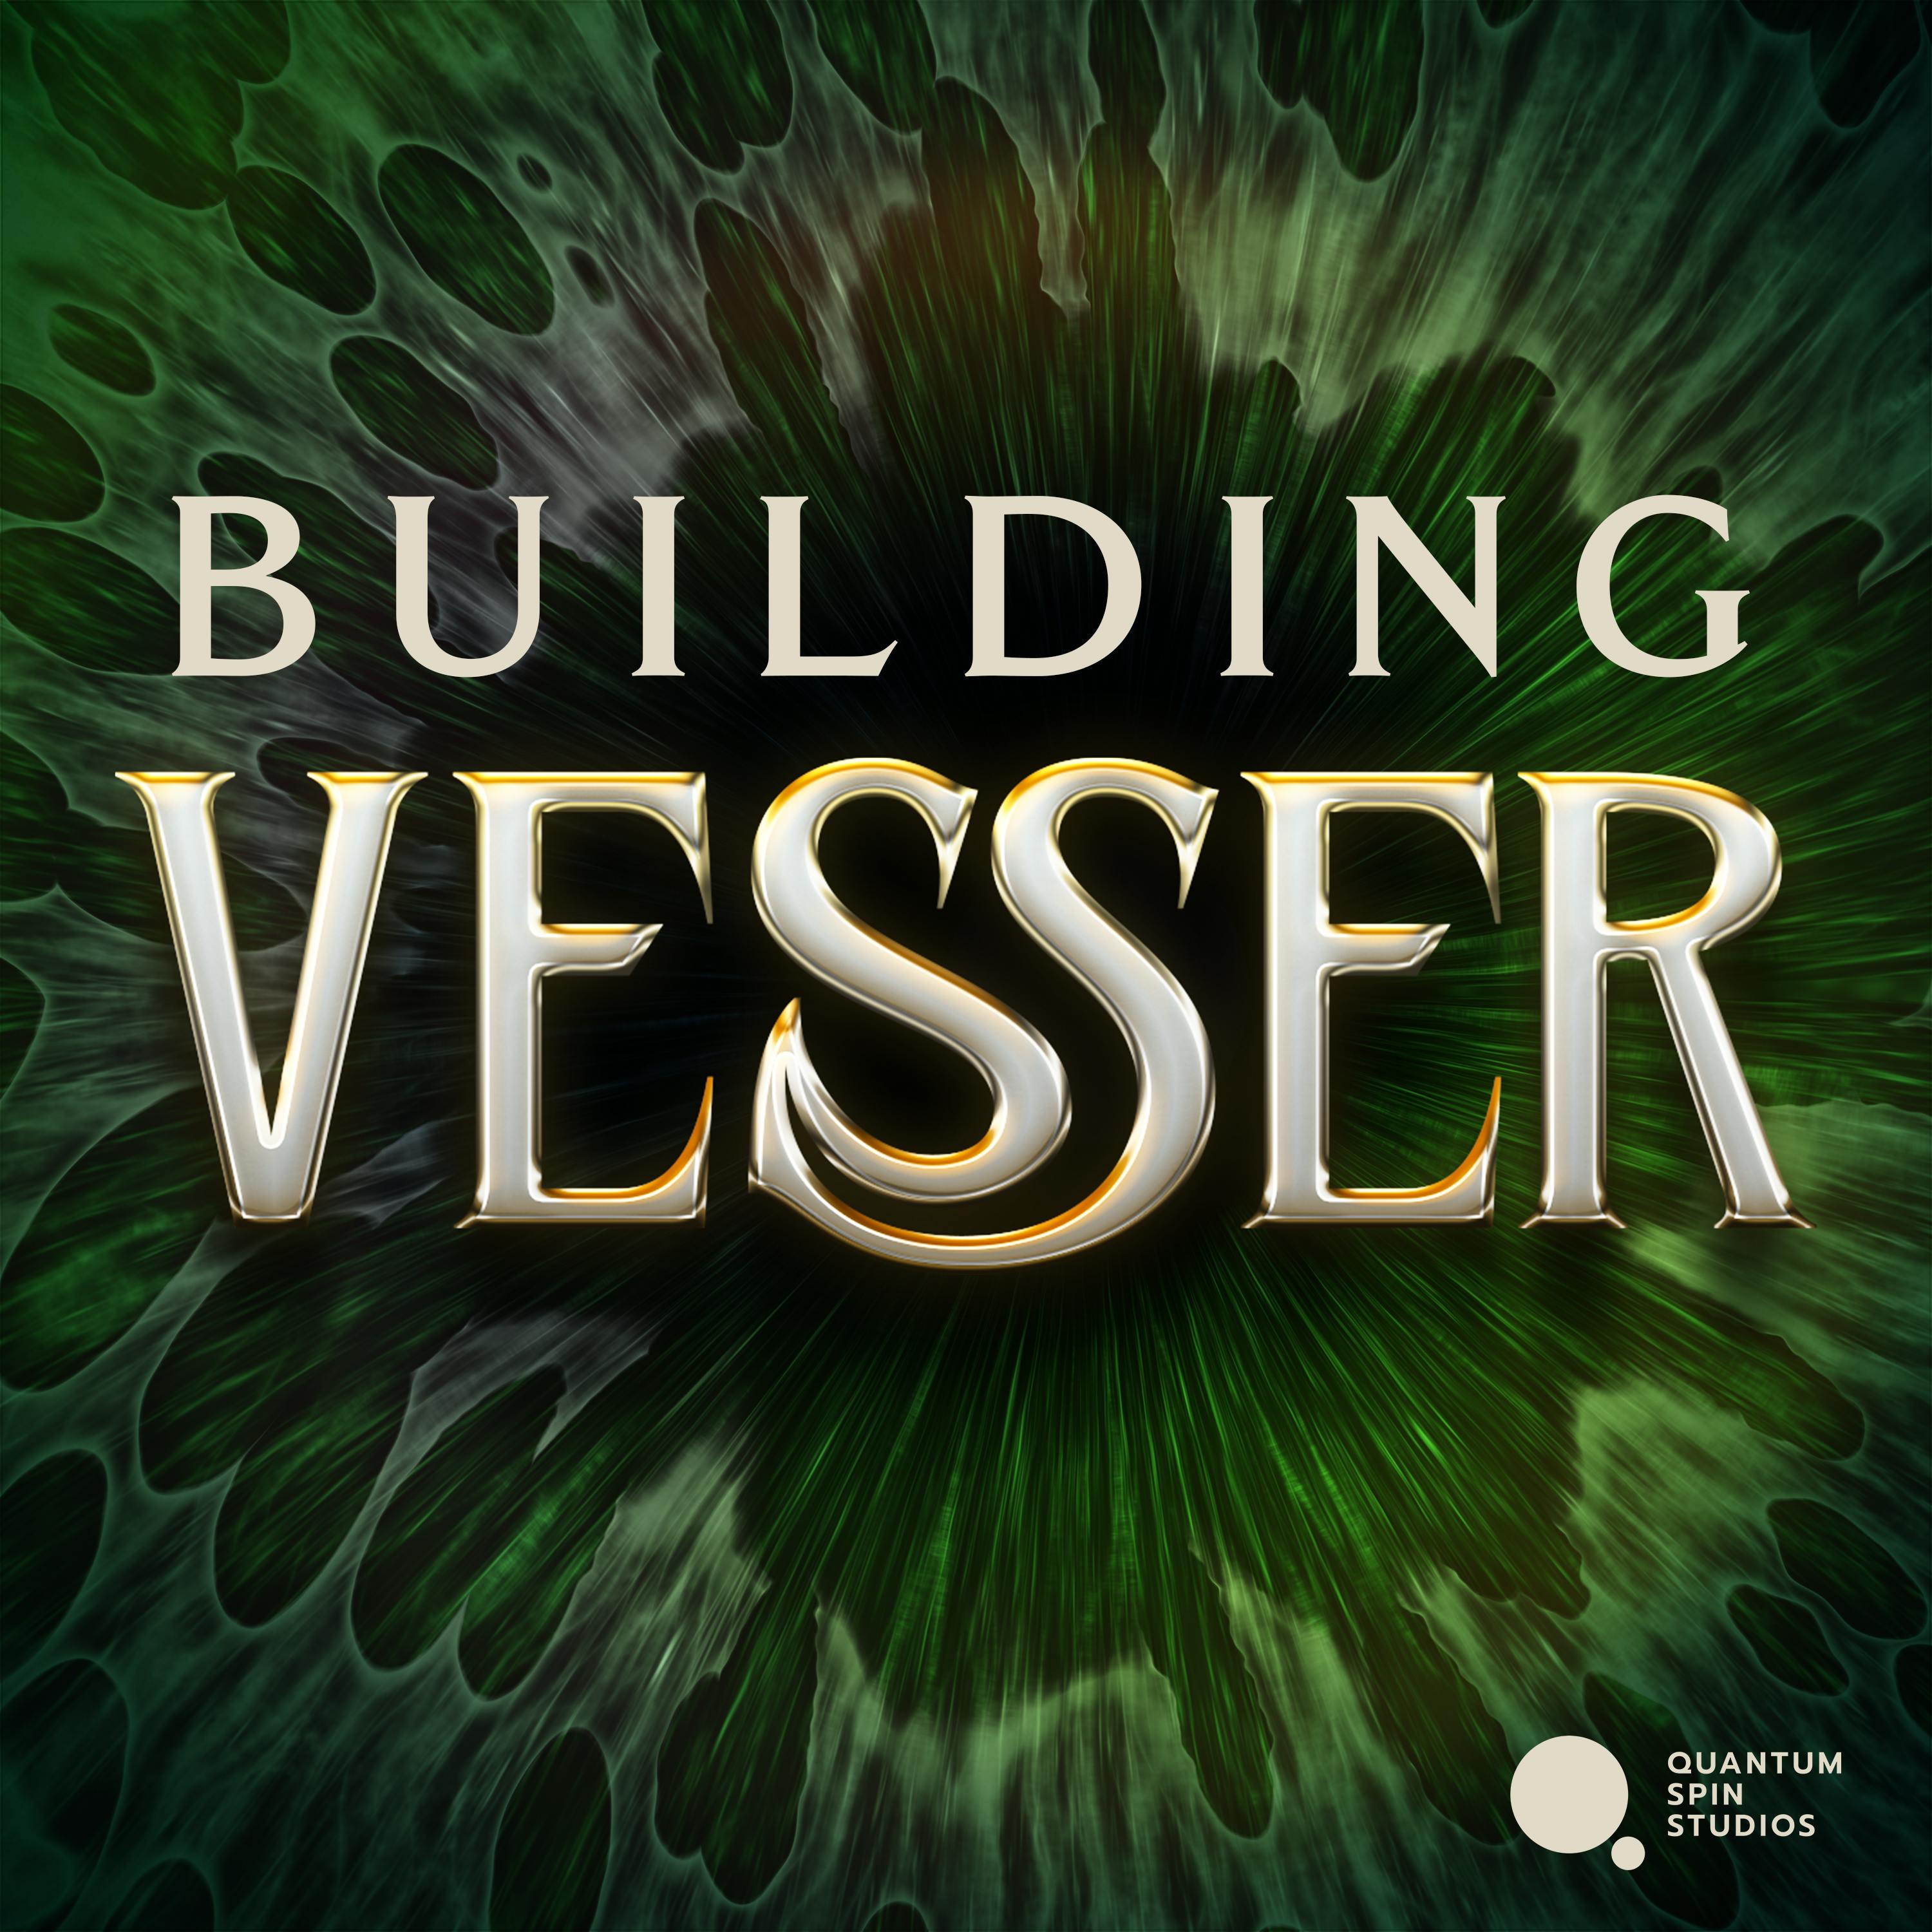 Building Vesser: Energy and the Psychology of Exile